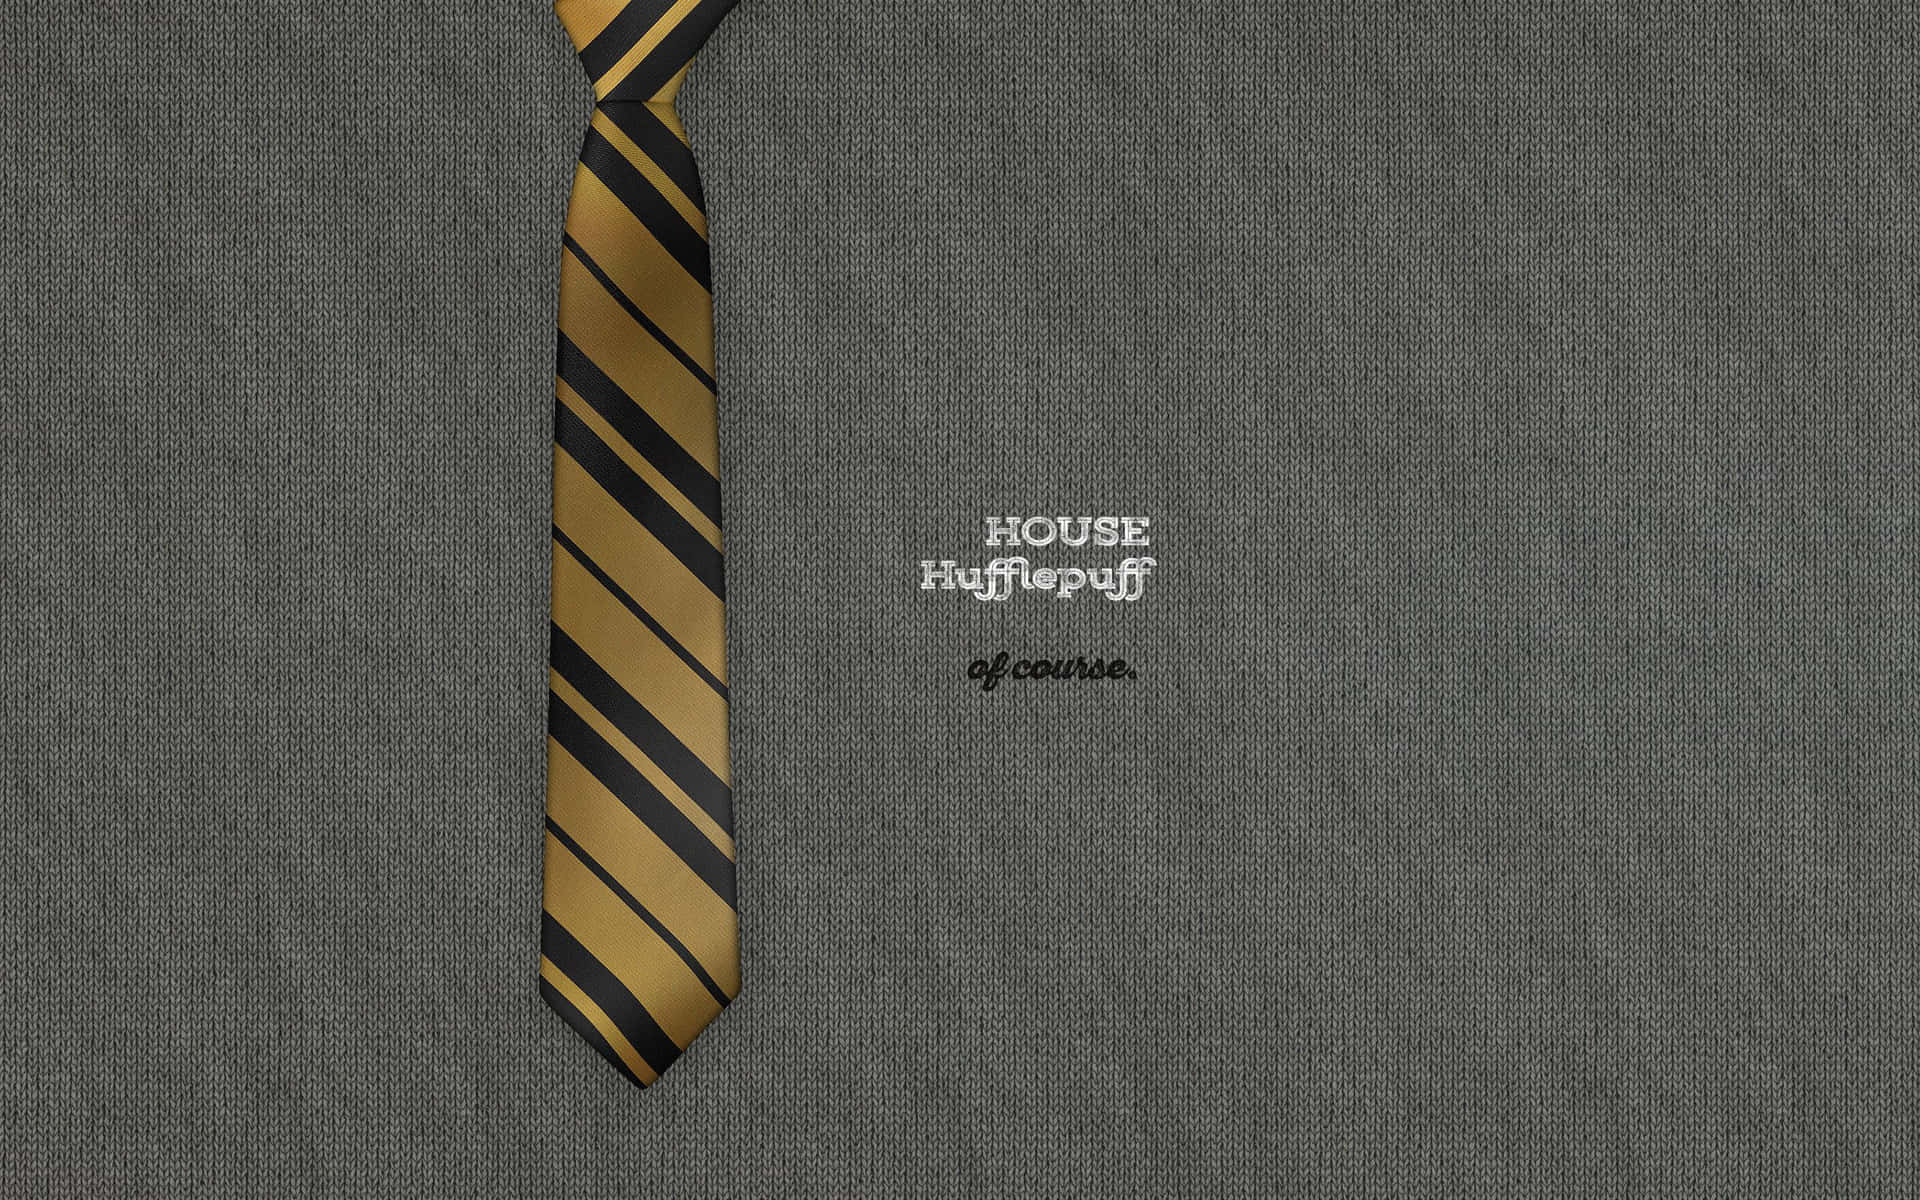 Proud to be a Hufflepuff